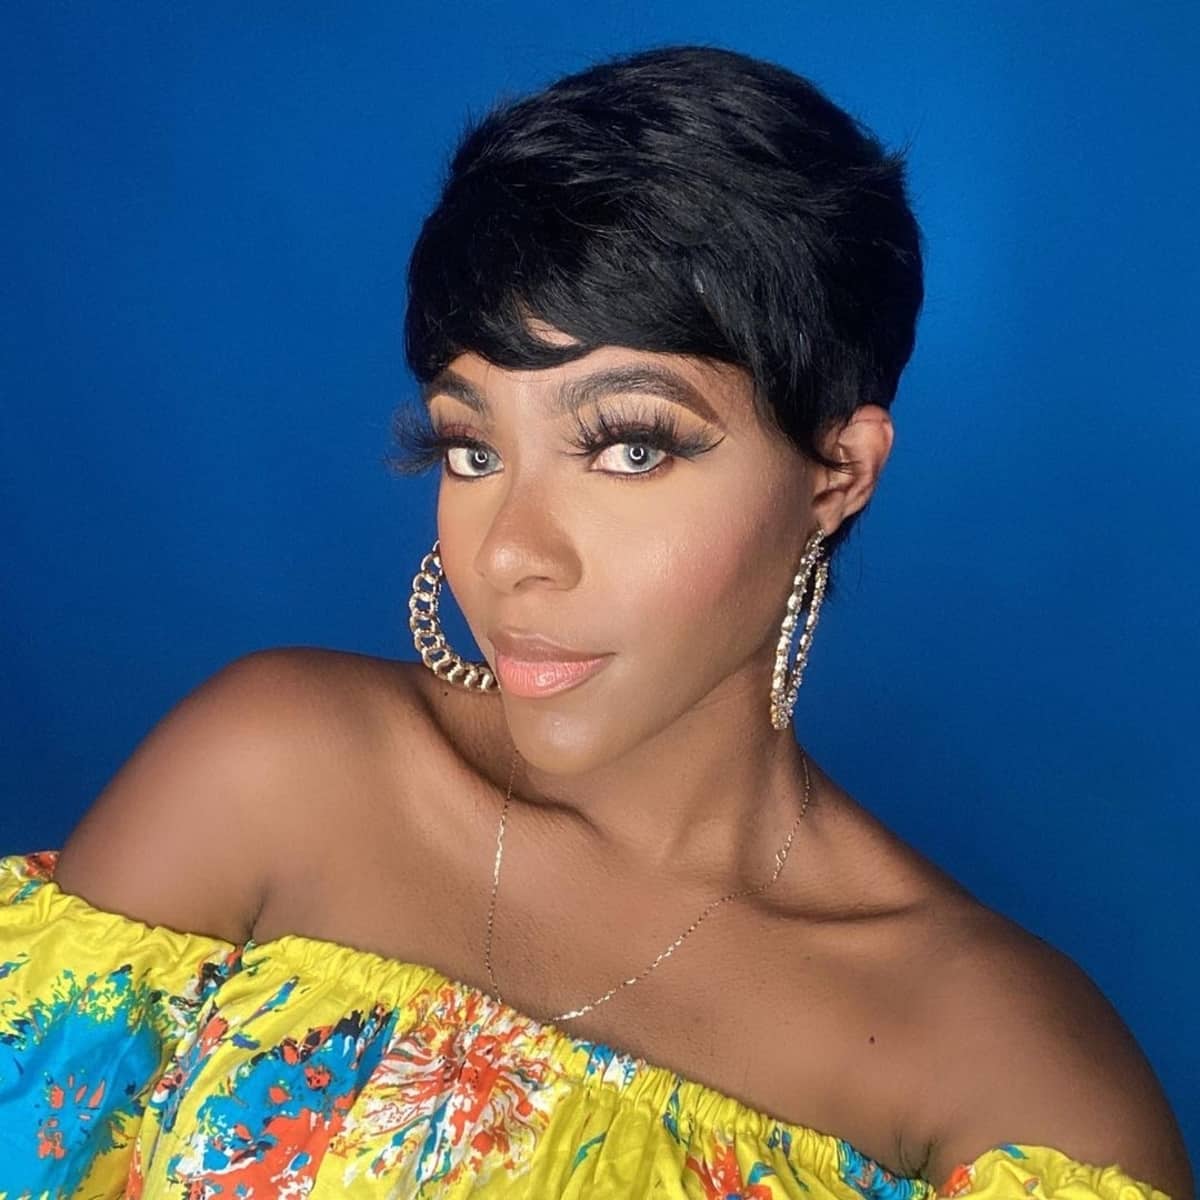 Short Pixie Hairstyle for Black Women